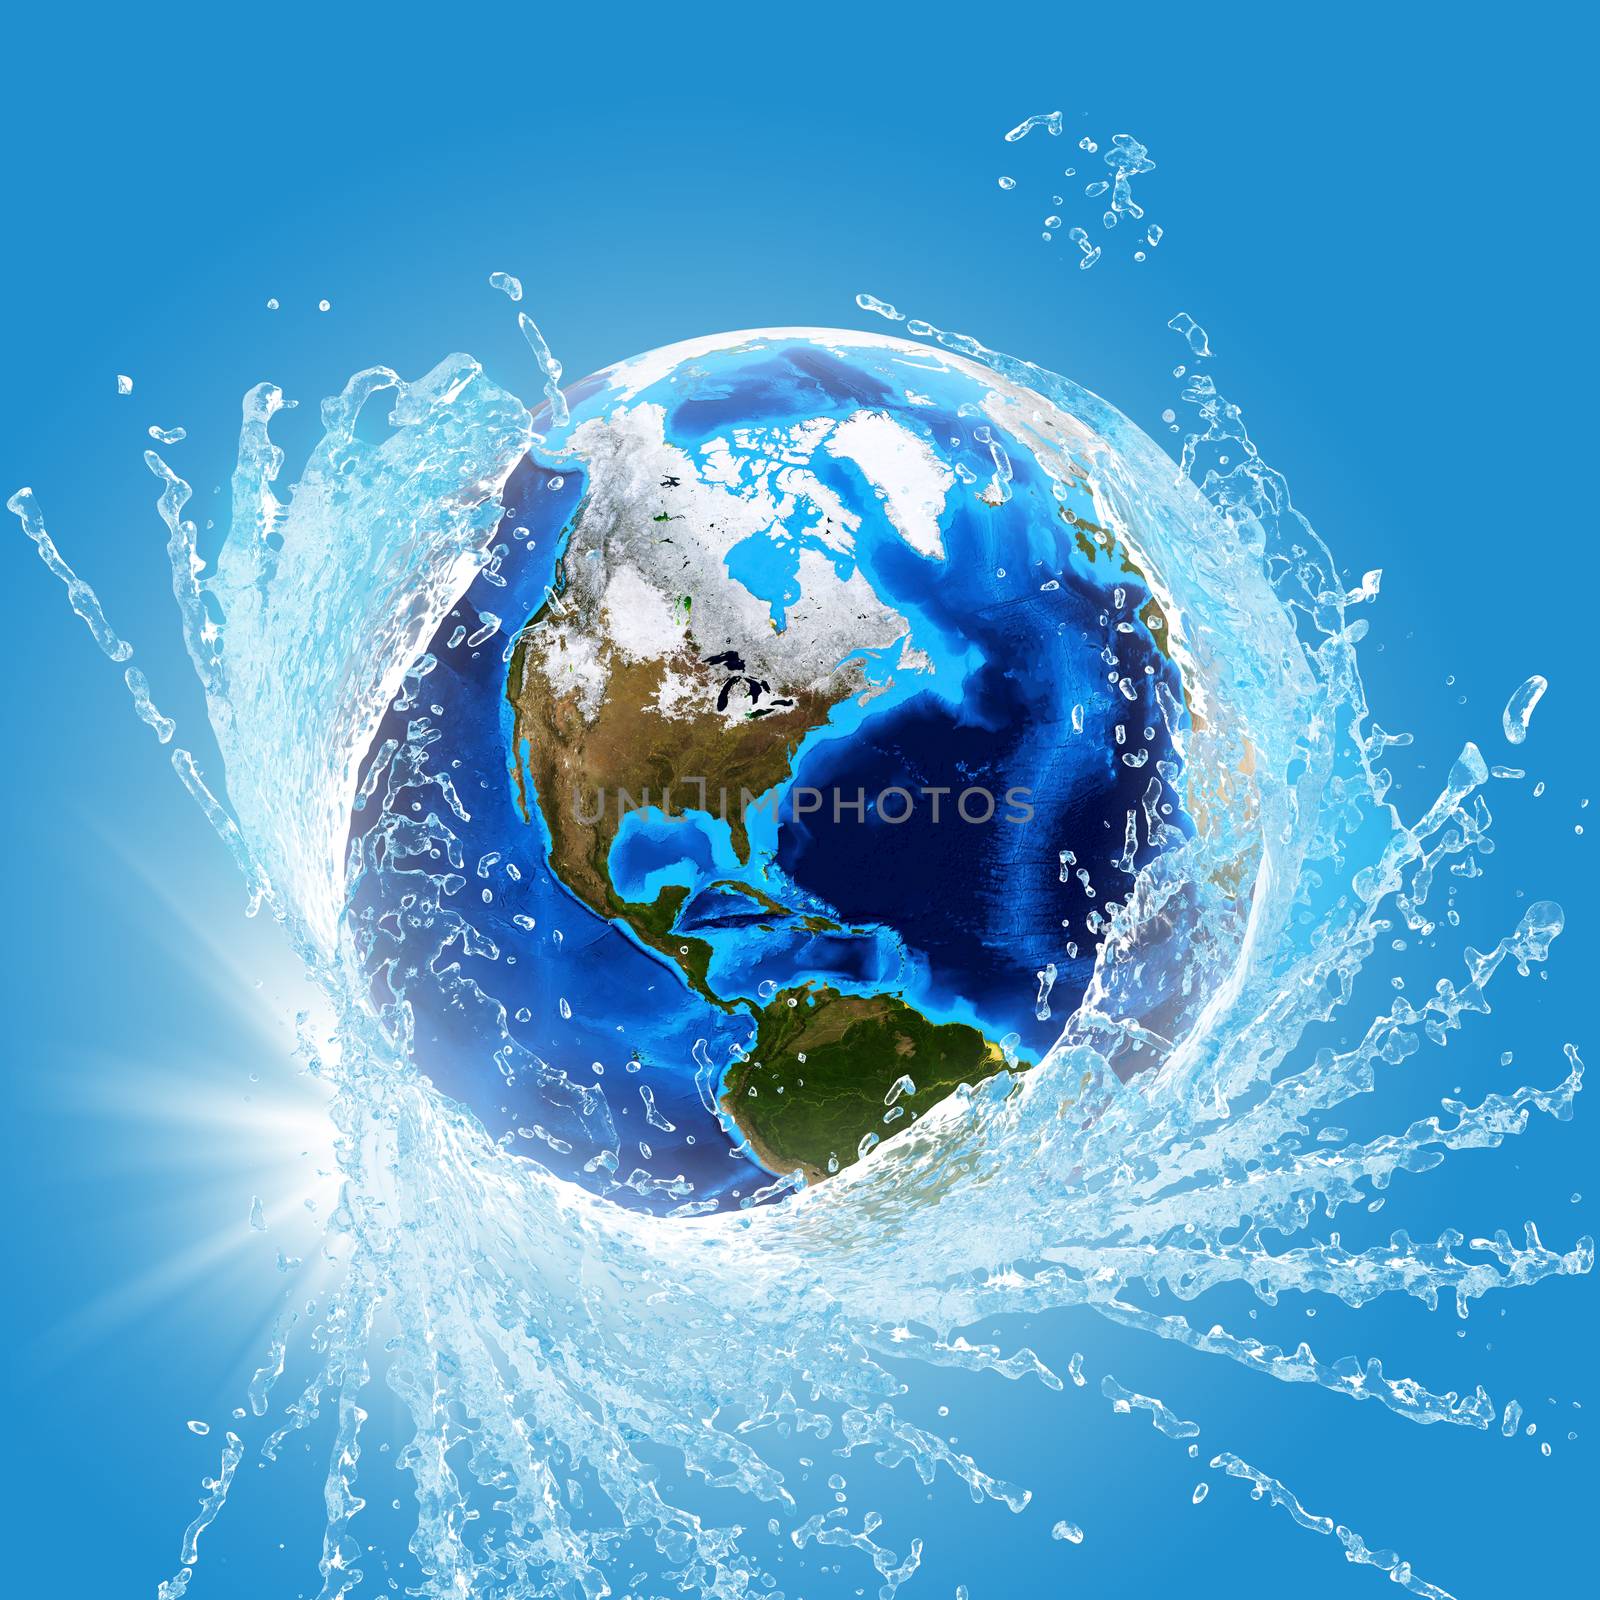 Earth and water. Elements of this image are furnished by NASA